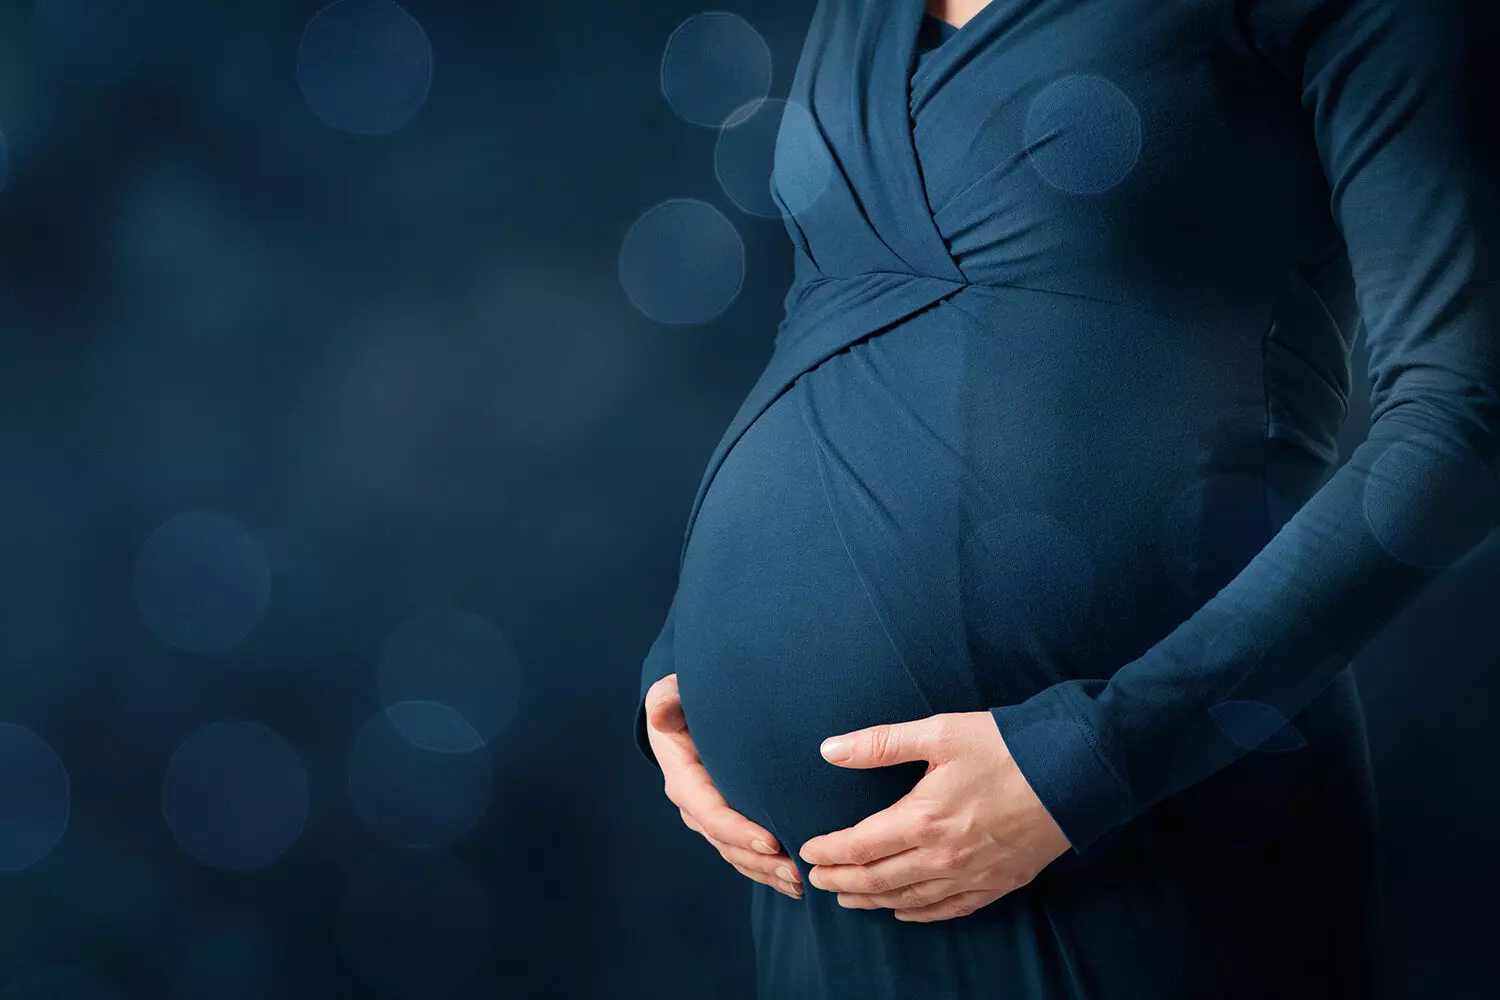 COVID-19 increases risk of pregnancy complications, suggests new study